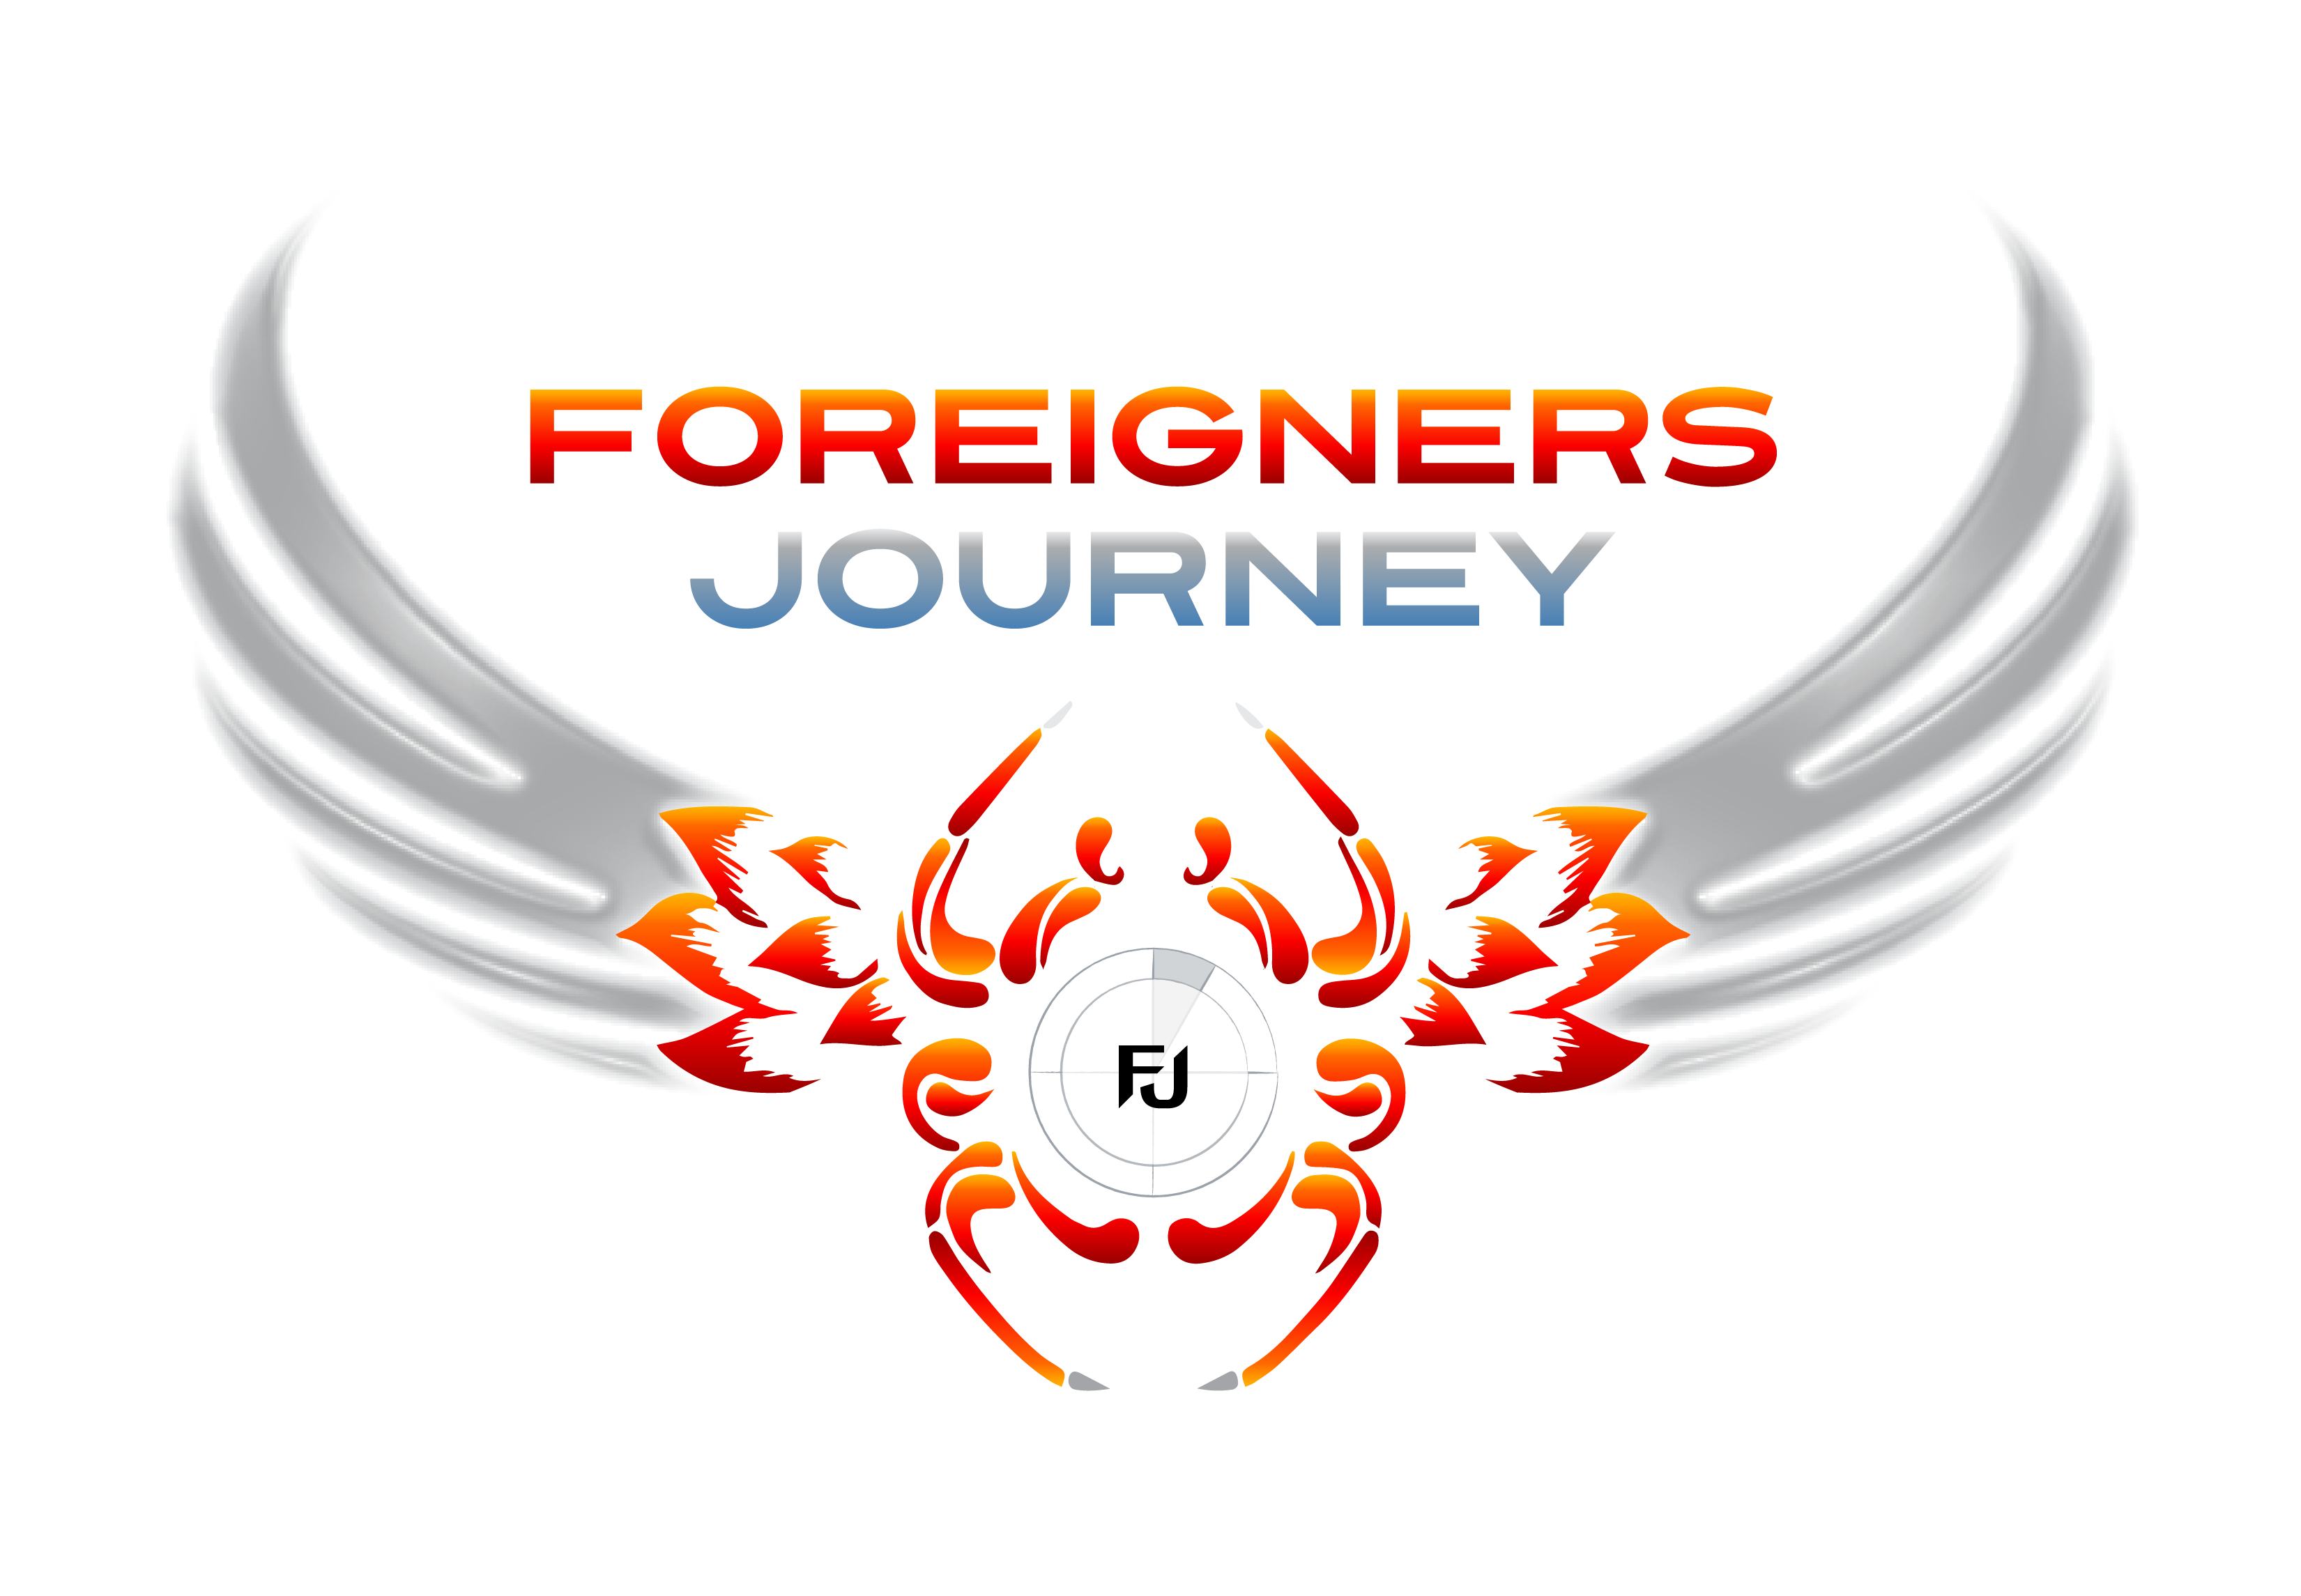 FOREIGNERS JOURNEY